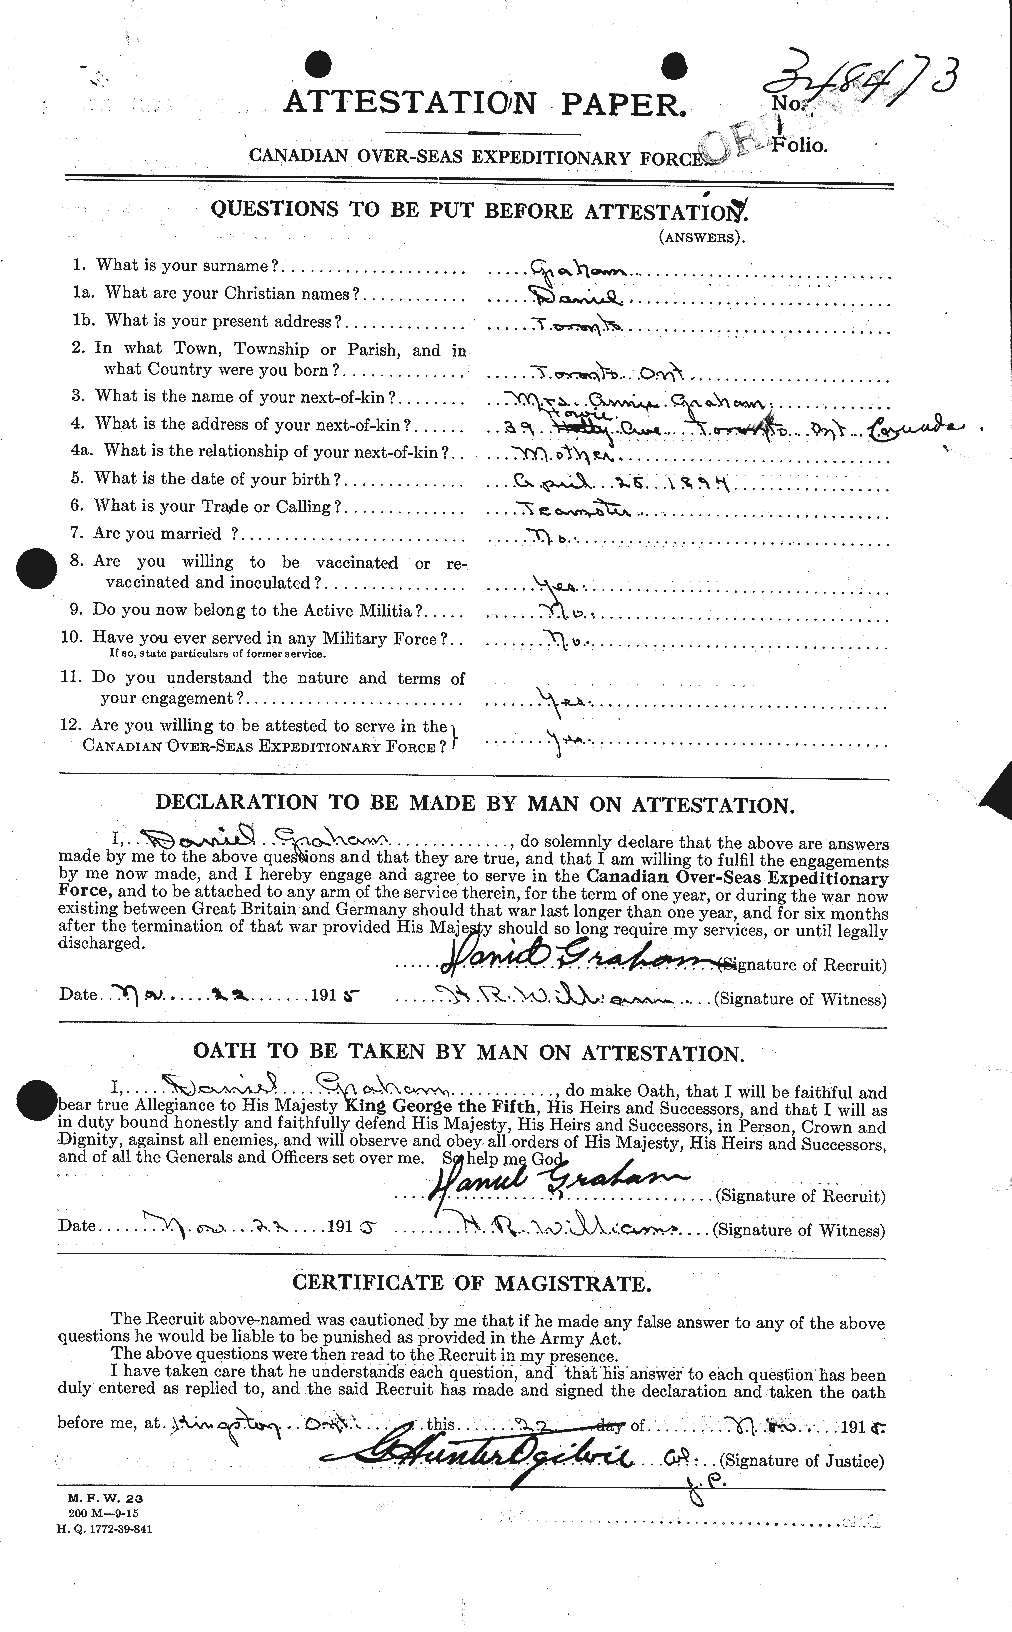 Personnel Records of the First World War - CEF 353809a